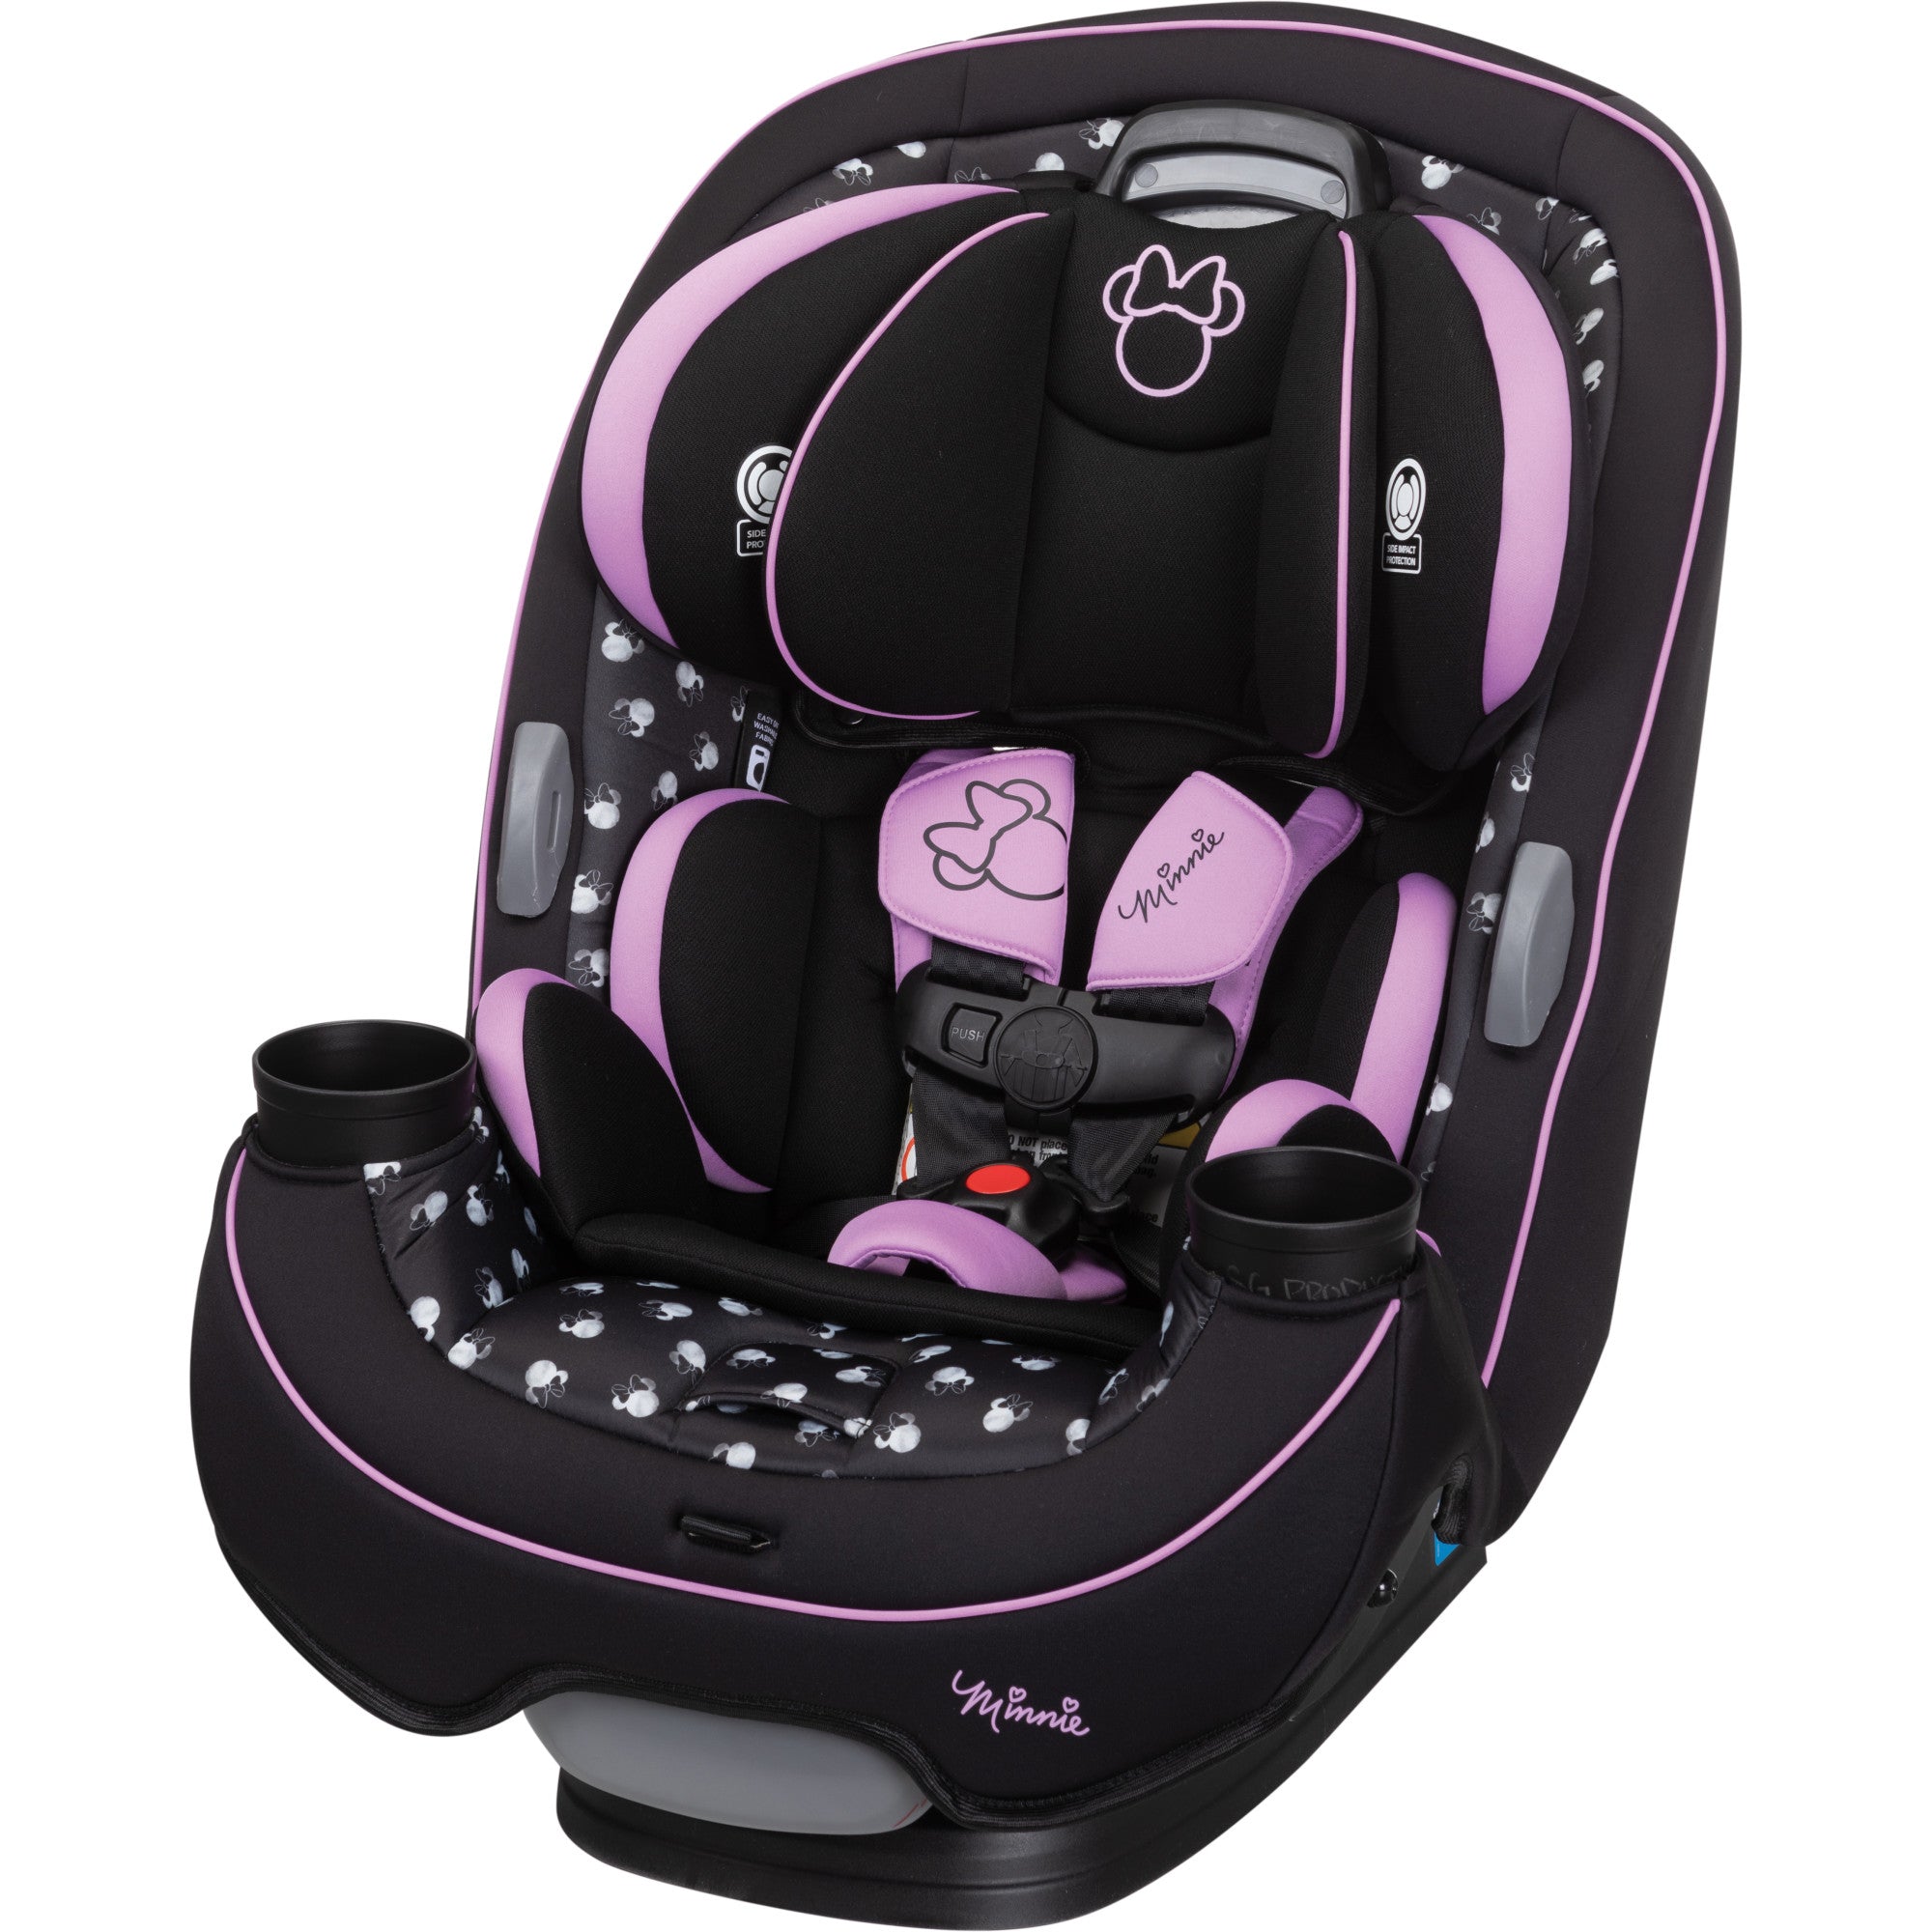 Disney Baby Grow and Go™ All-in-One Convertible Car Seat - Minnie